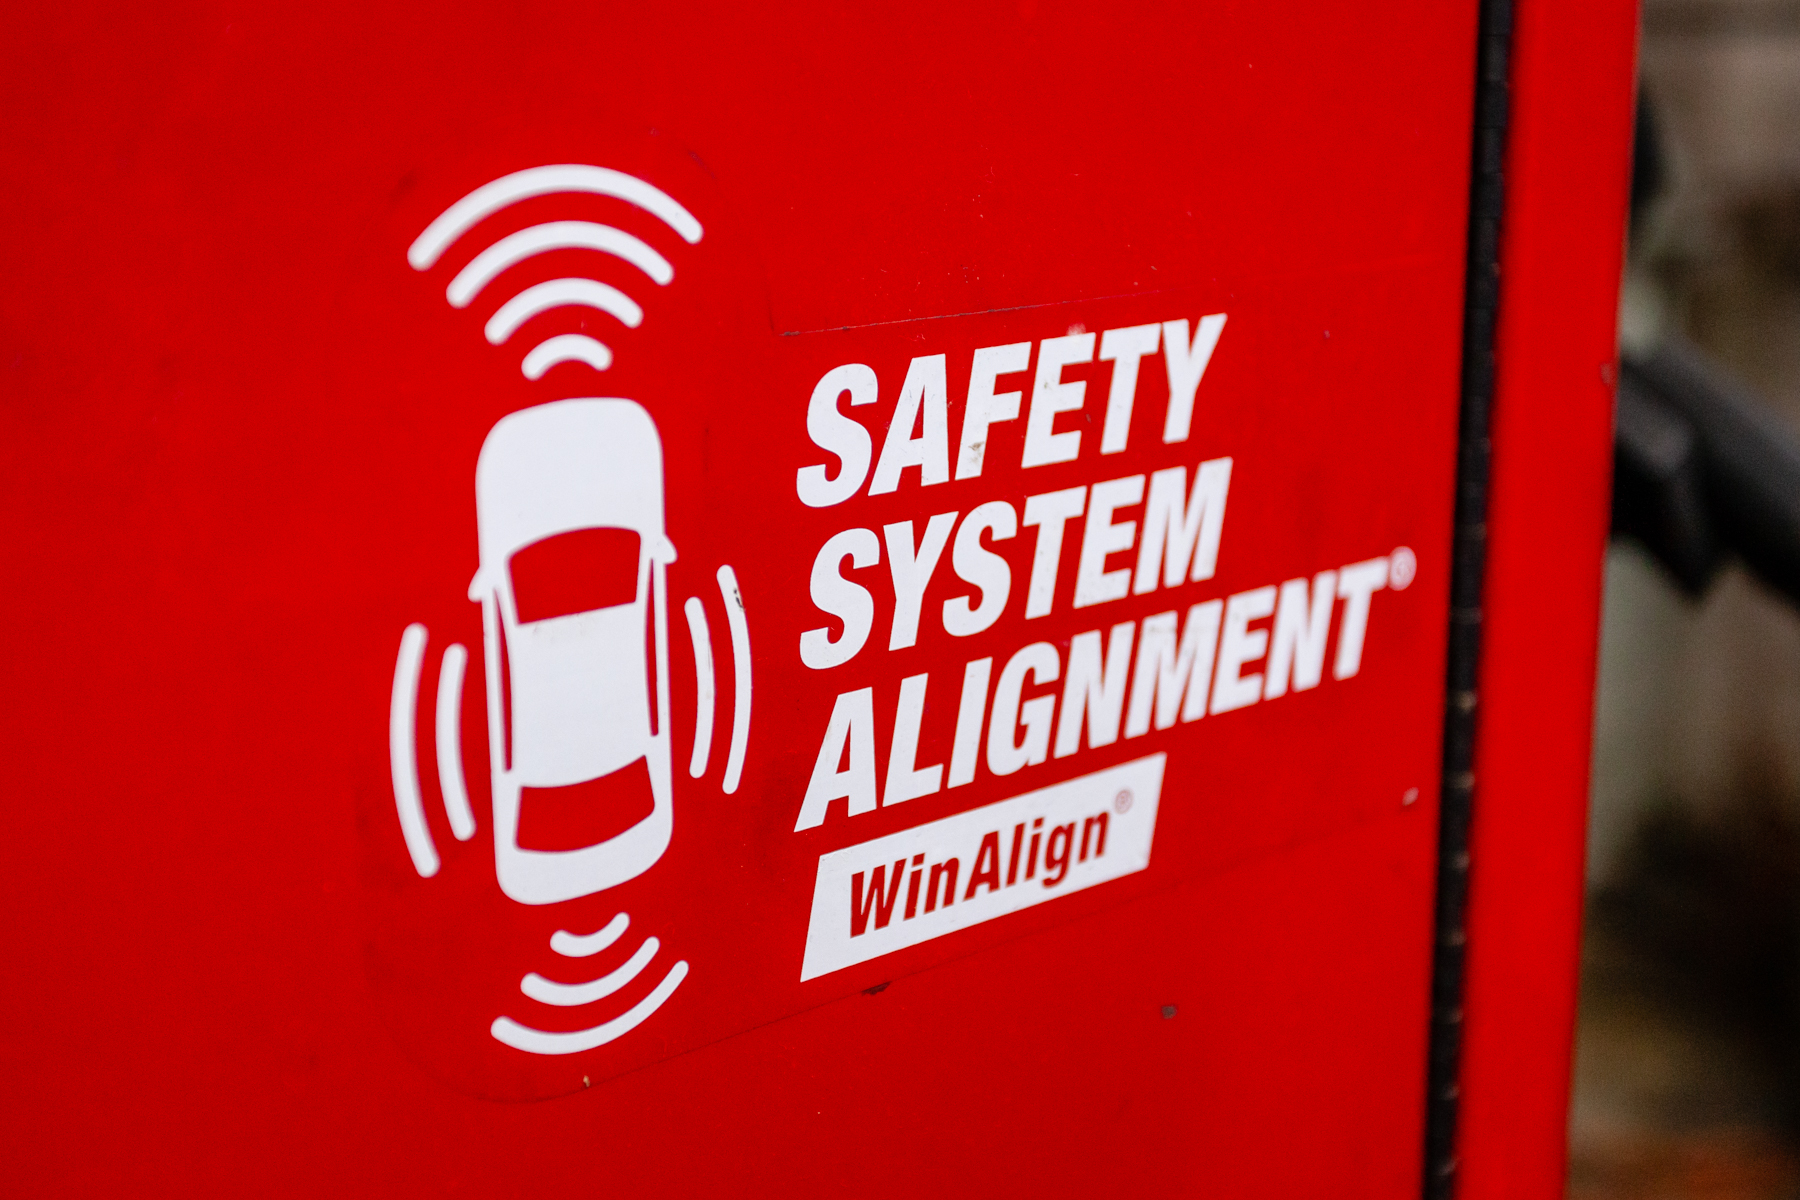 WinAlign Safety System Alingment for Tesla Body Repair - S&T Auto Body